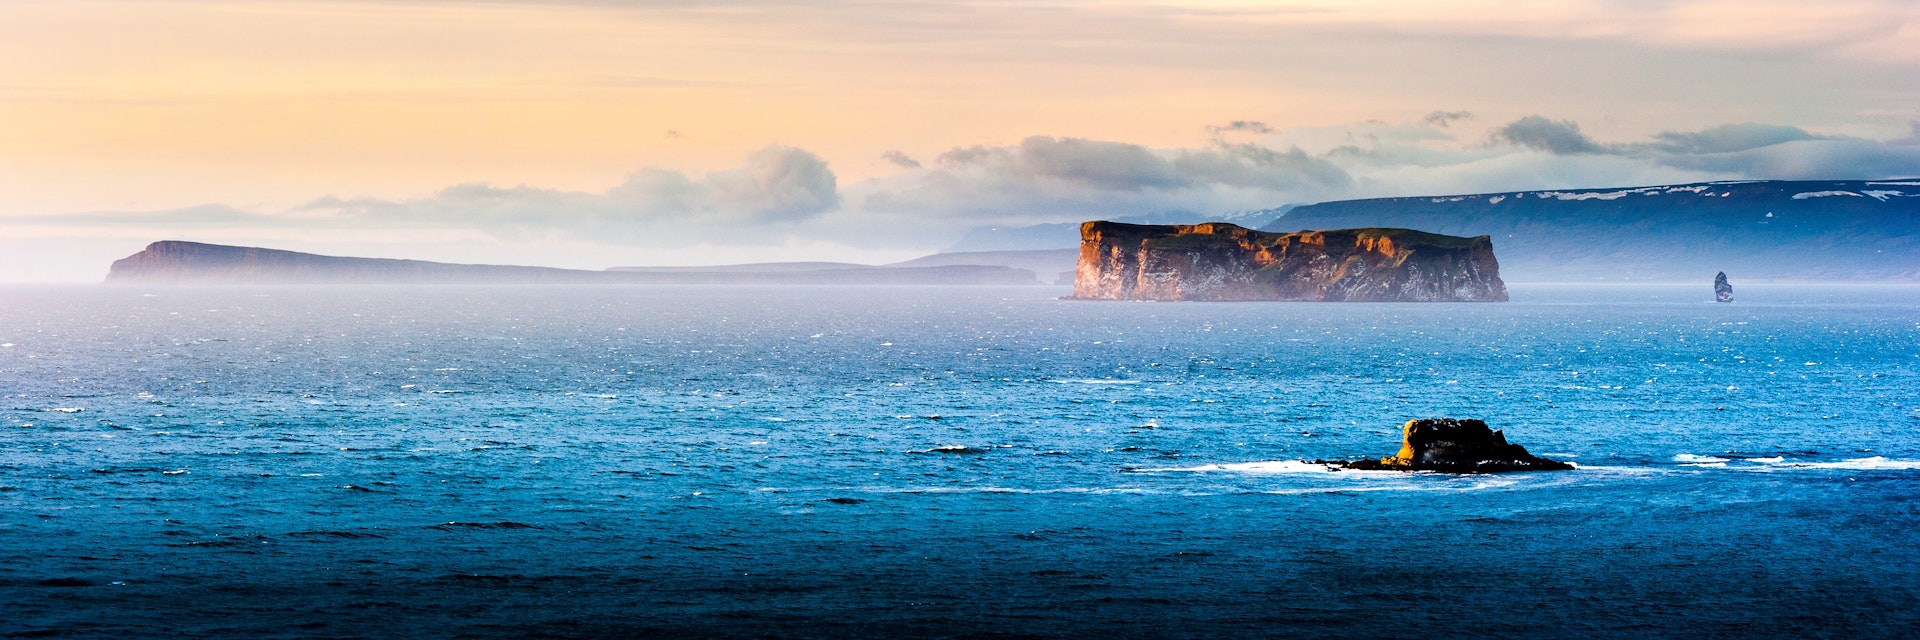 drangey island during midnight sun, northern iceland; drangey is the place of the classic Grettis saga